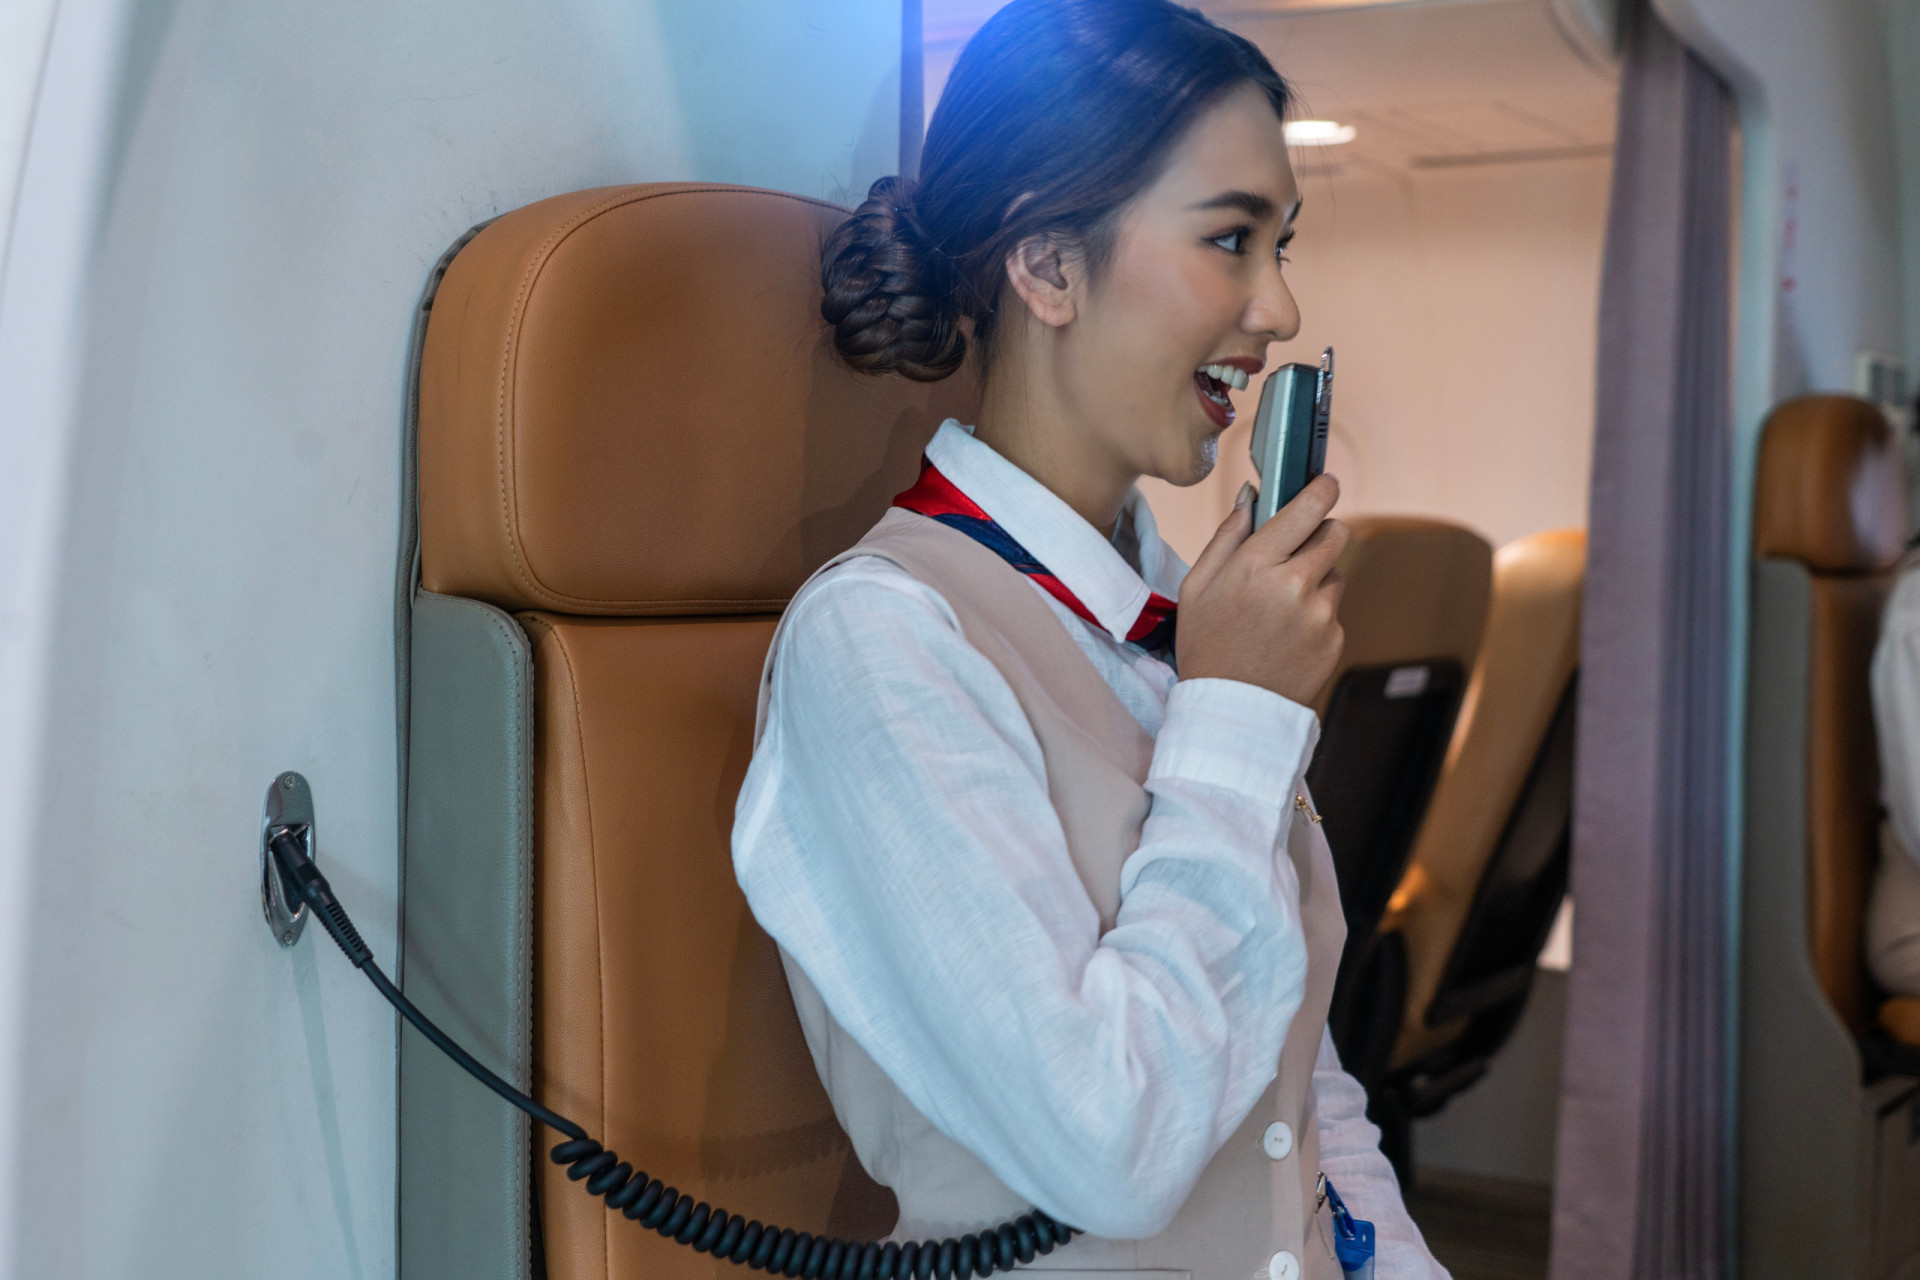 <p>This is the seat used by flight attendants during takeoff and landing. It may not be the safest seat on an airplane, but it makes it easy for flight attendants to jump to attention.</p><p>You may also like:<a href="https://www.starsinsider.com/n/491311?utm_source=msn.com&utm_medium=display&utm_campaign=referral_description&utm_content=732333en-us"> Gigs canceled for the strangest of reasons</a></p>